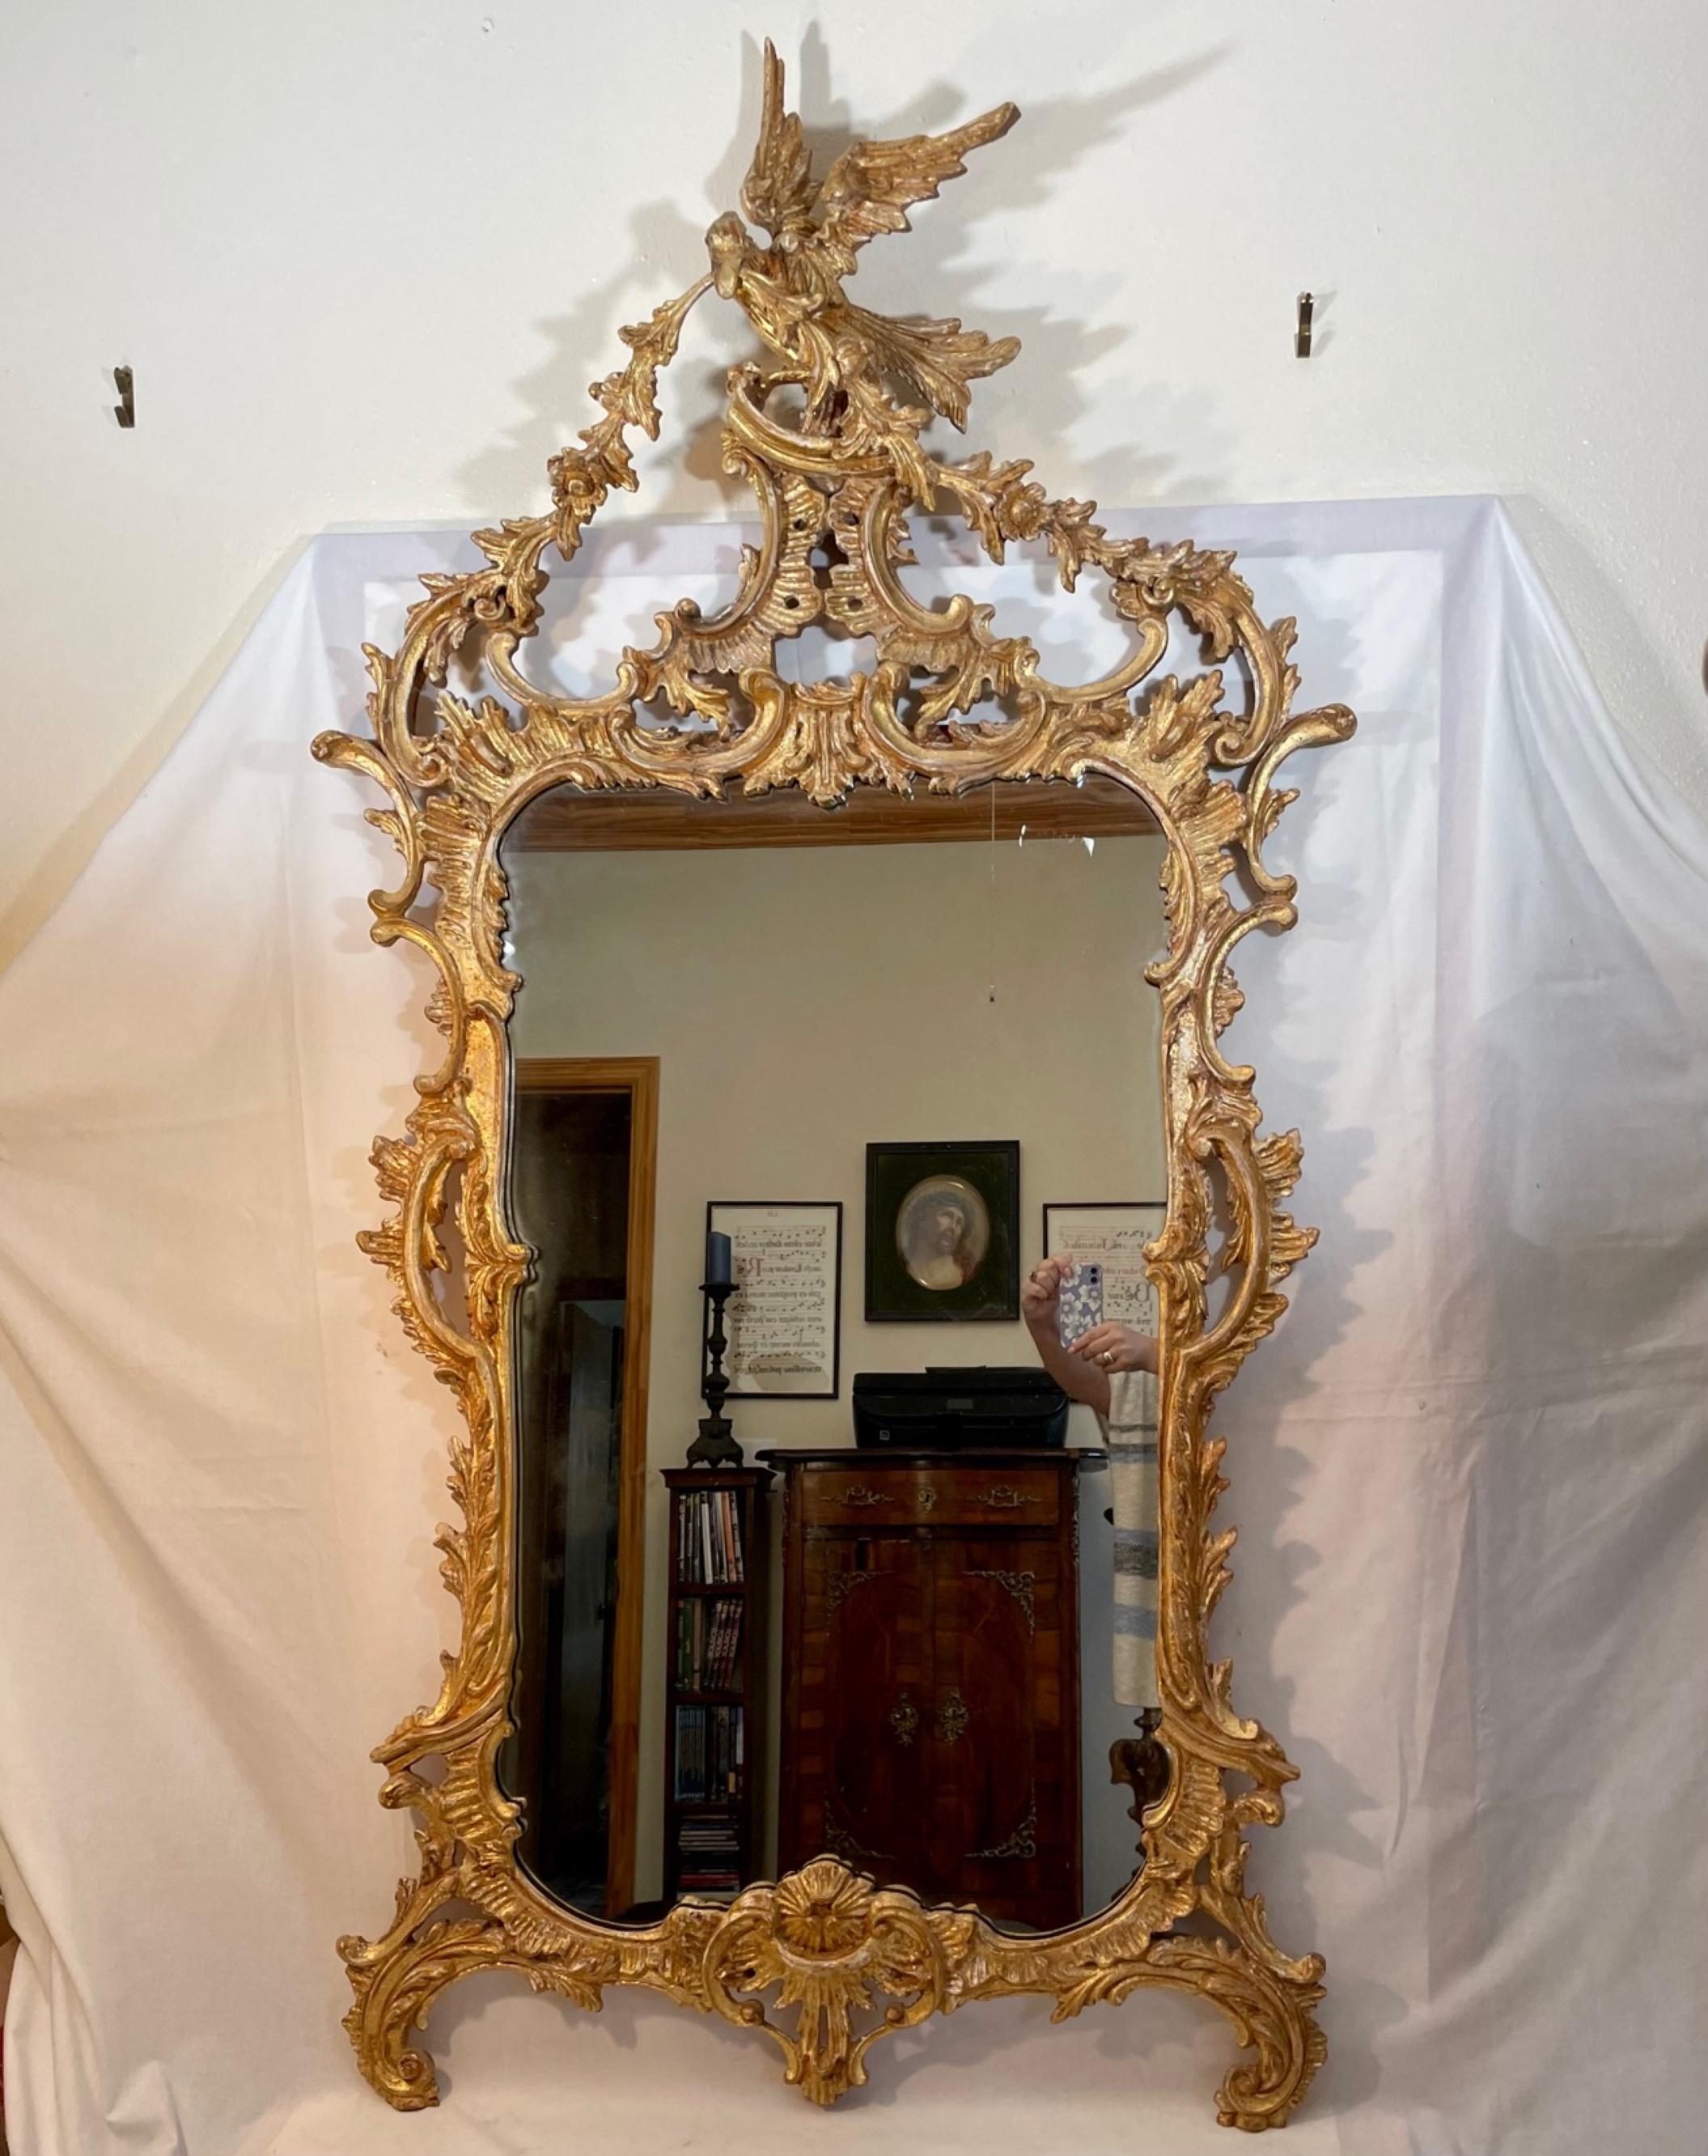 Chippendale style carved chinoiserie giltwood mirror.

Lavish ornately hand carved Thomas Chippendale style large wall mirror. The Chinese inspired decor is beautifully gilded. Refined delicate ornaments surround the mirror plate. The frame is